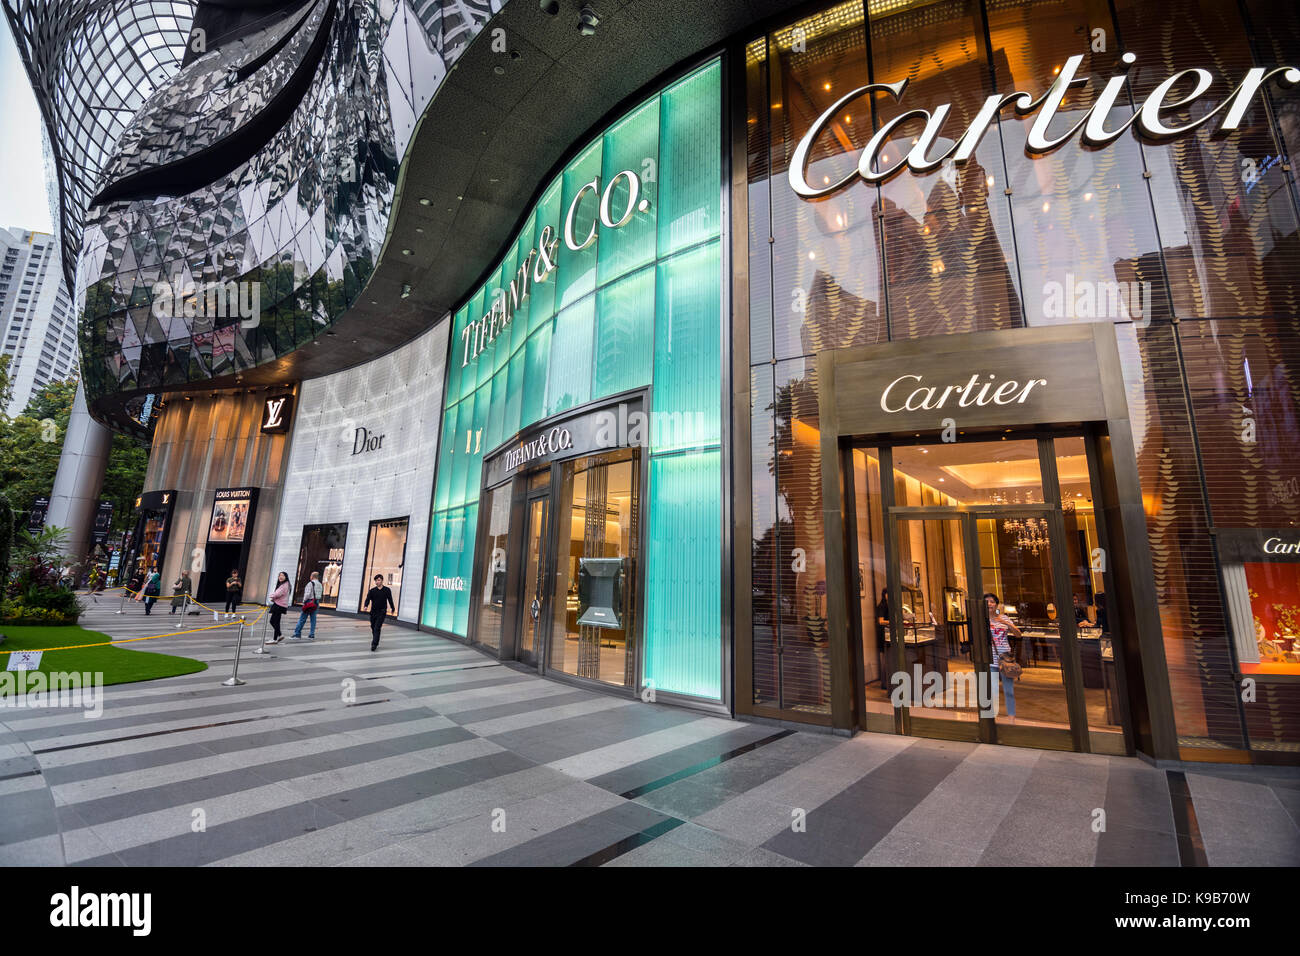 Dior, Tiffany and Cartier Stores, Ion Orchard Shopping Mall, Singapore Stock Photo